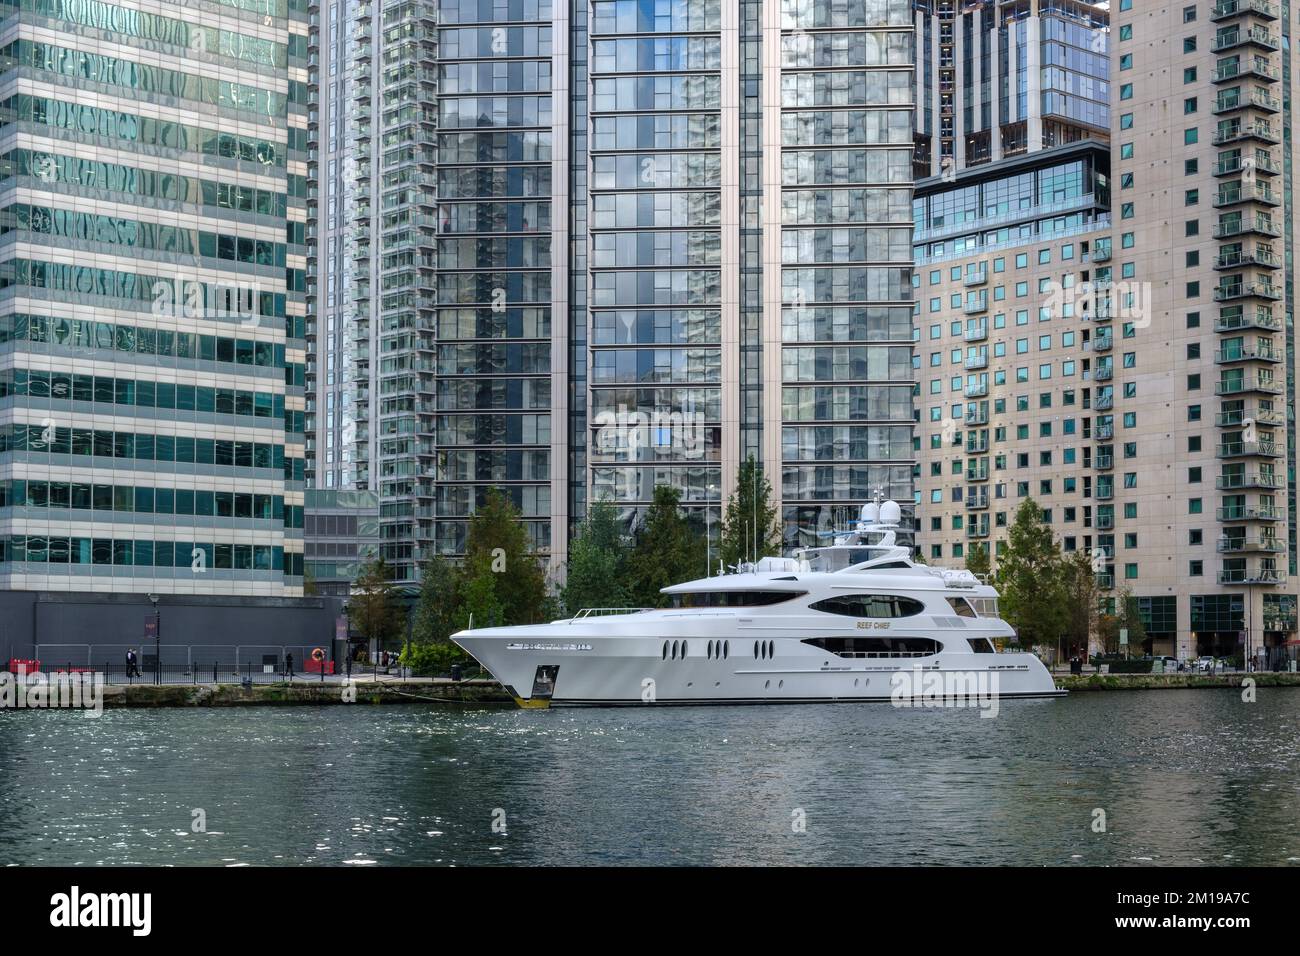 Yacht Reef Chief docked, at the southern end of Bellmouth Passage in front of Deutsche Bank and other high-rise buildings in Canary Wharf, London, UK. Stock Photo